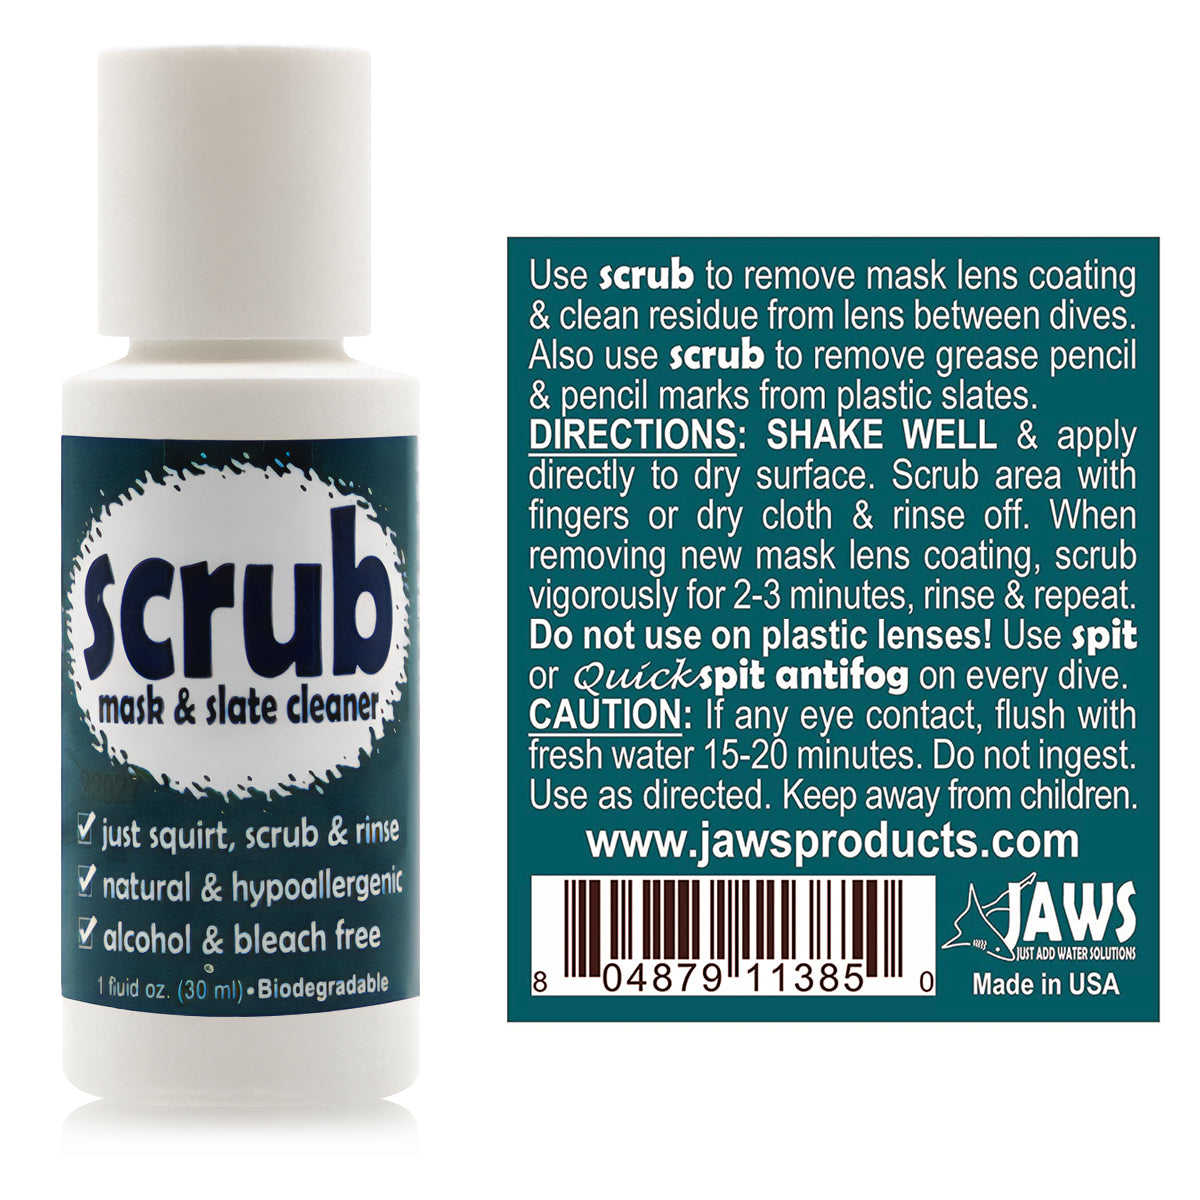 JAWS Scrub and Quick Spit Combo Kit for Water Sports and Gear JAWS